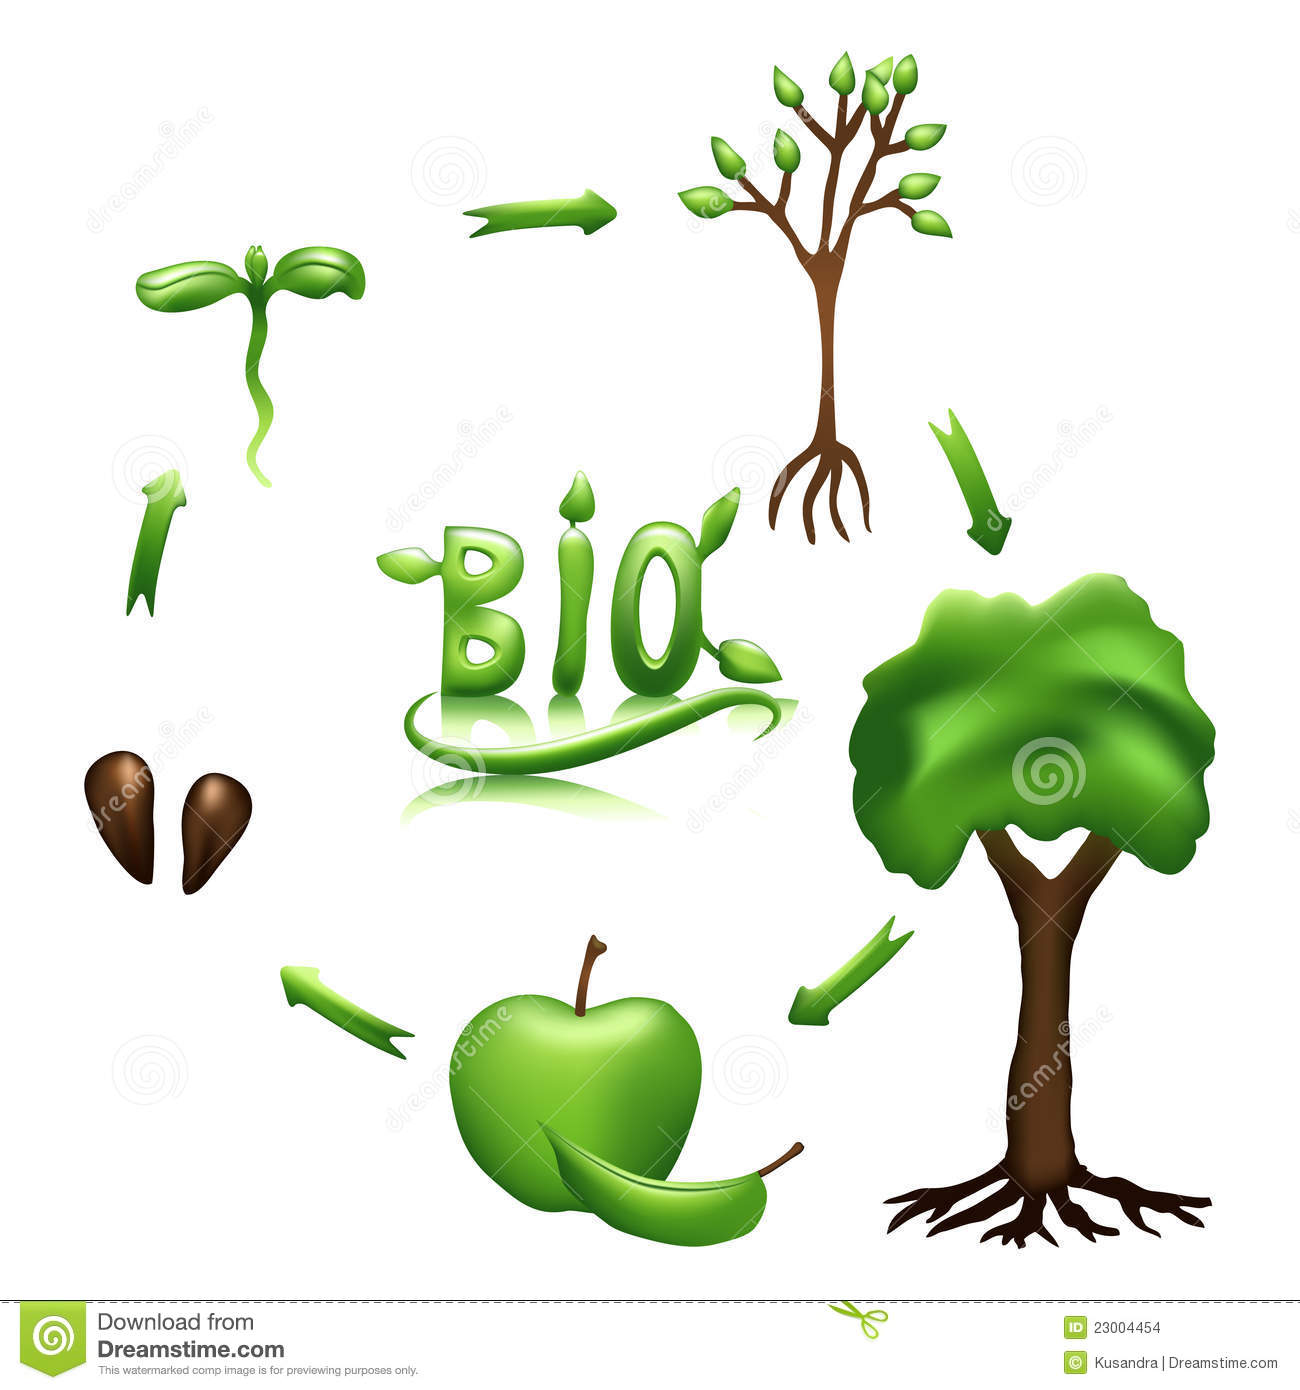 Apple Life Cycle And Bio Sign Stock Images   Image  23004454